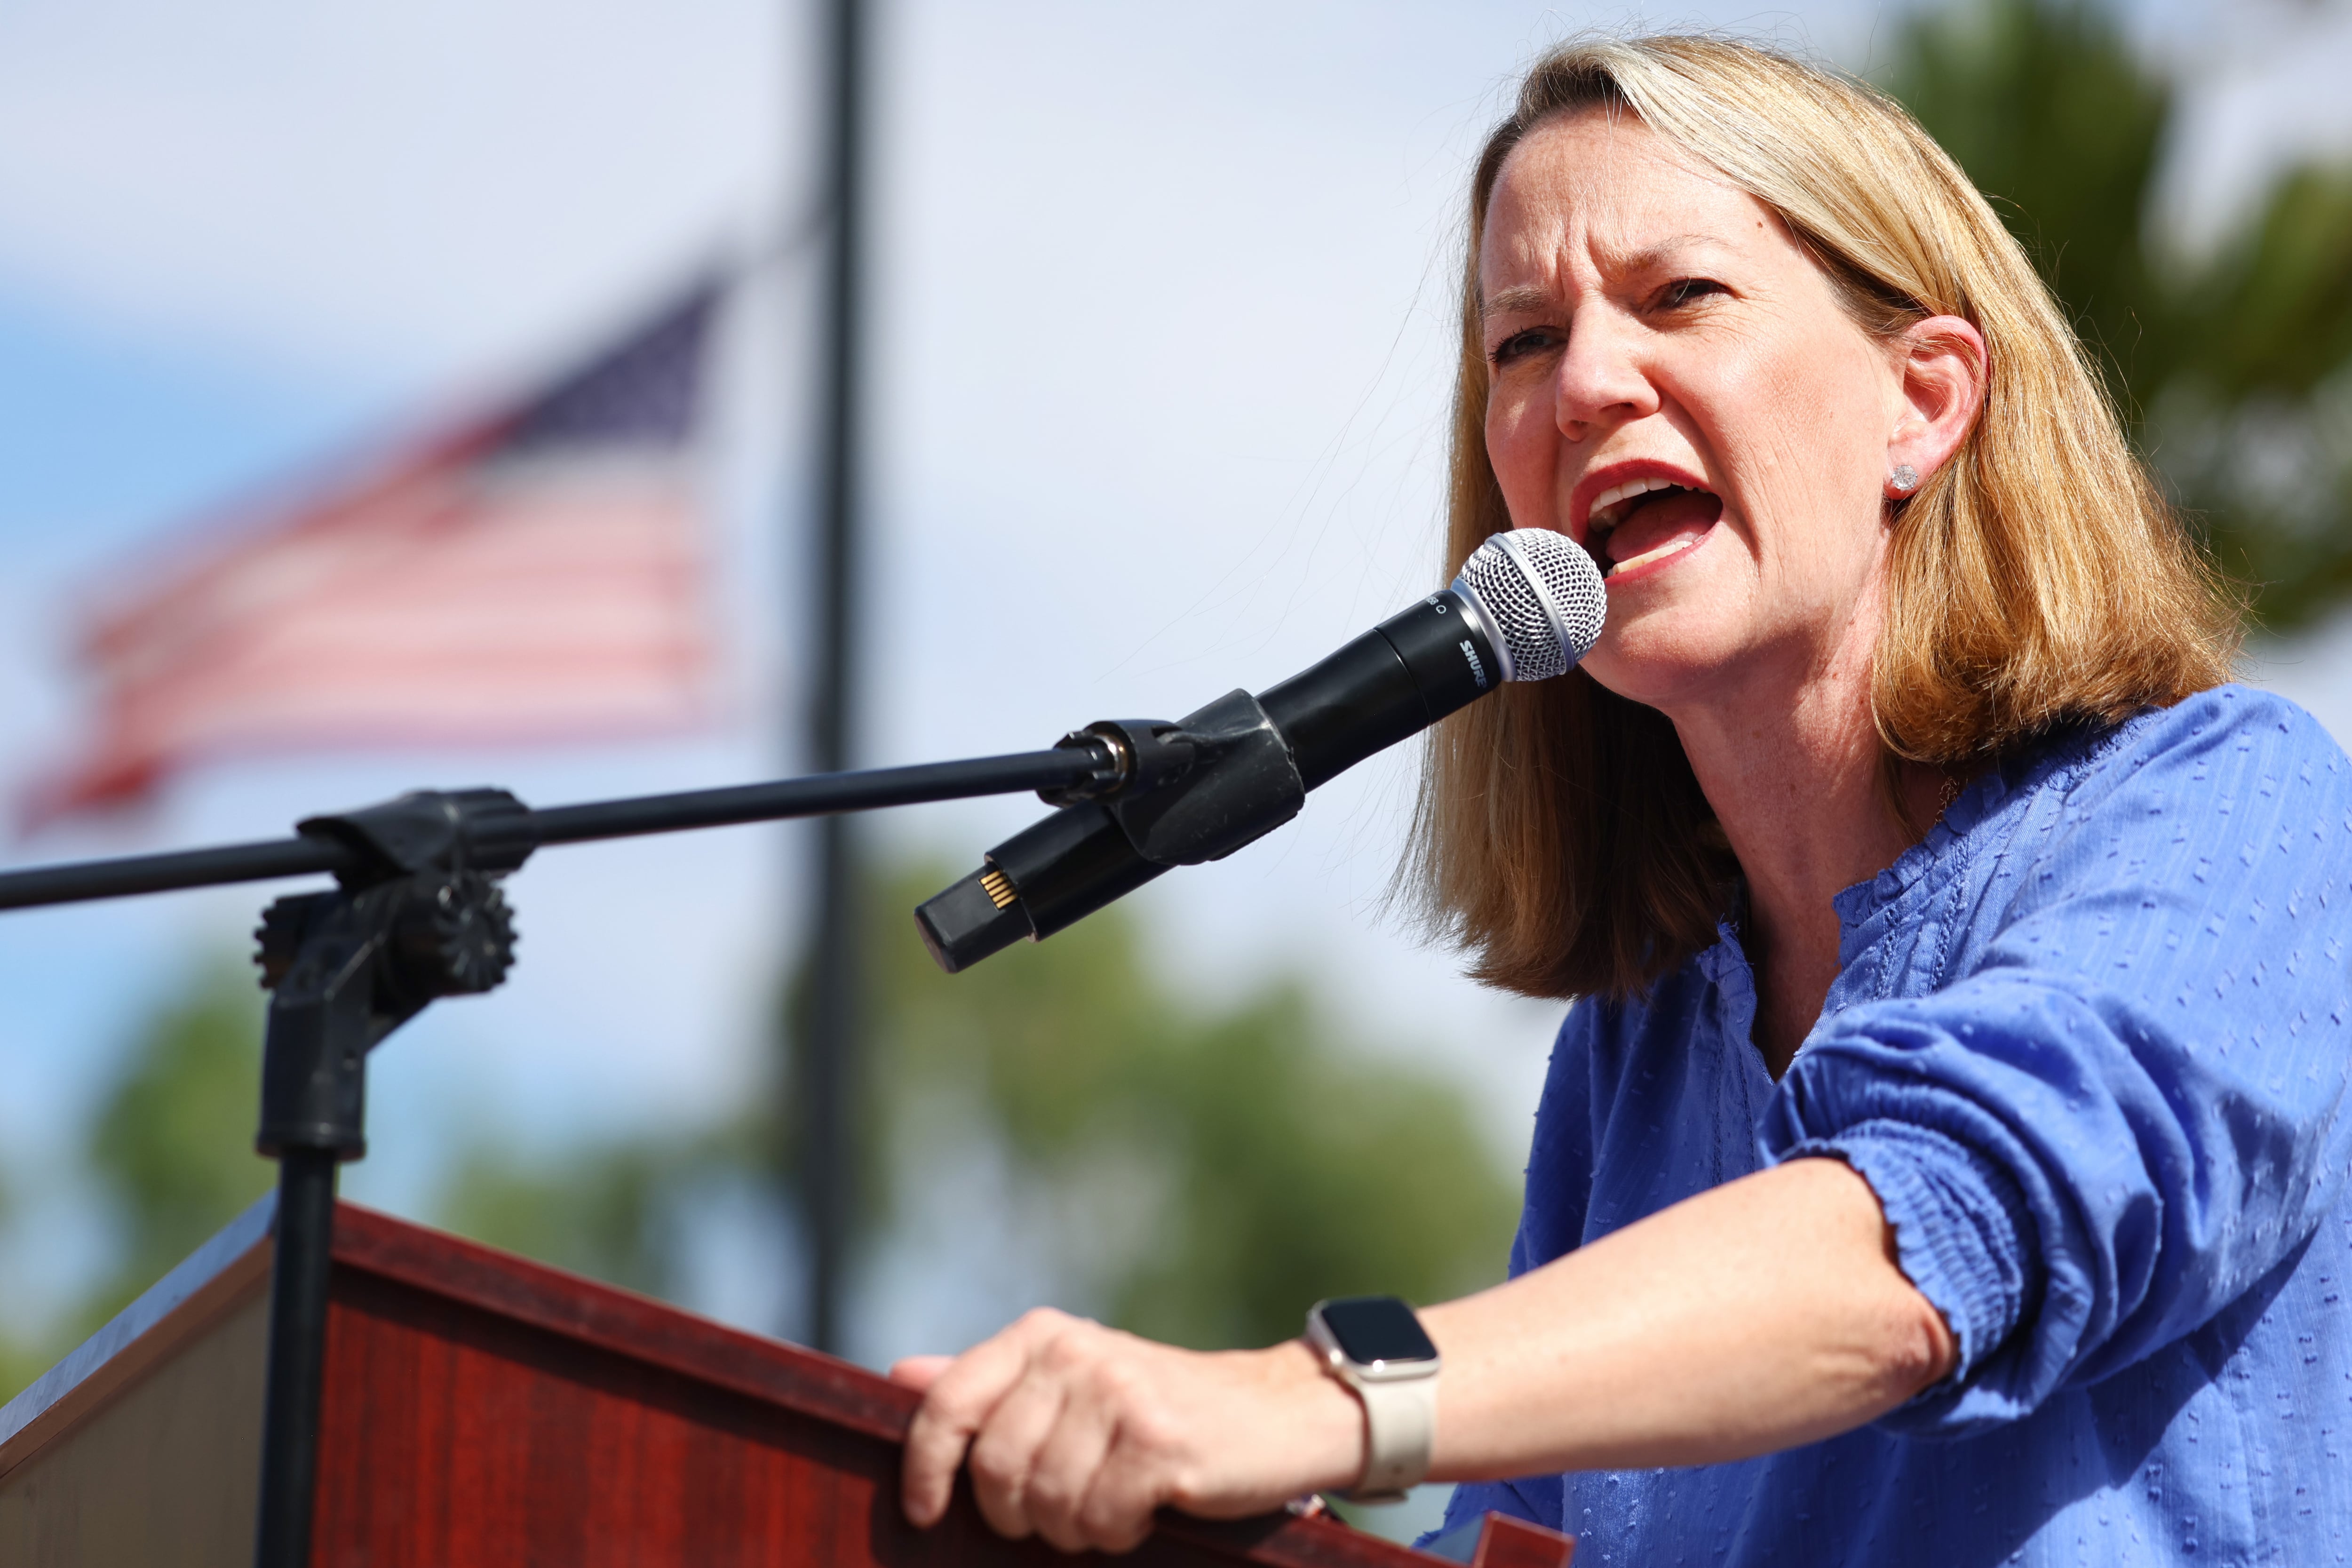 A woman speaks into a microphone outside as an American flag waves in the background